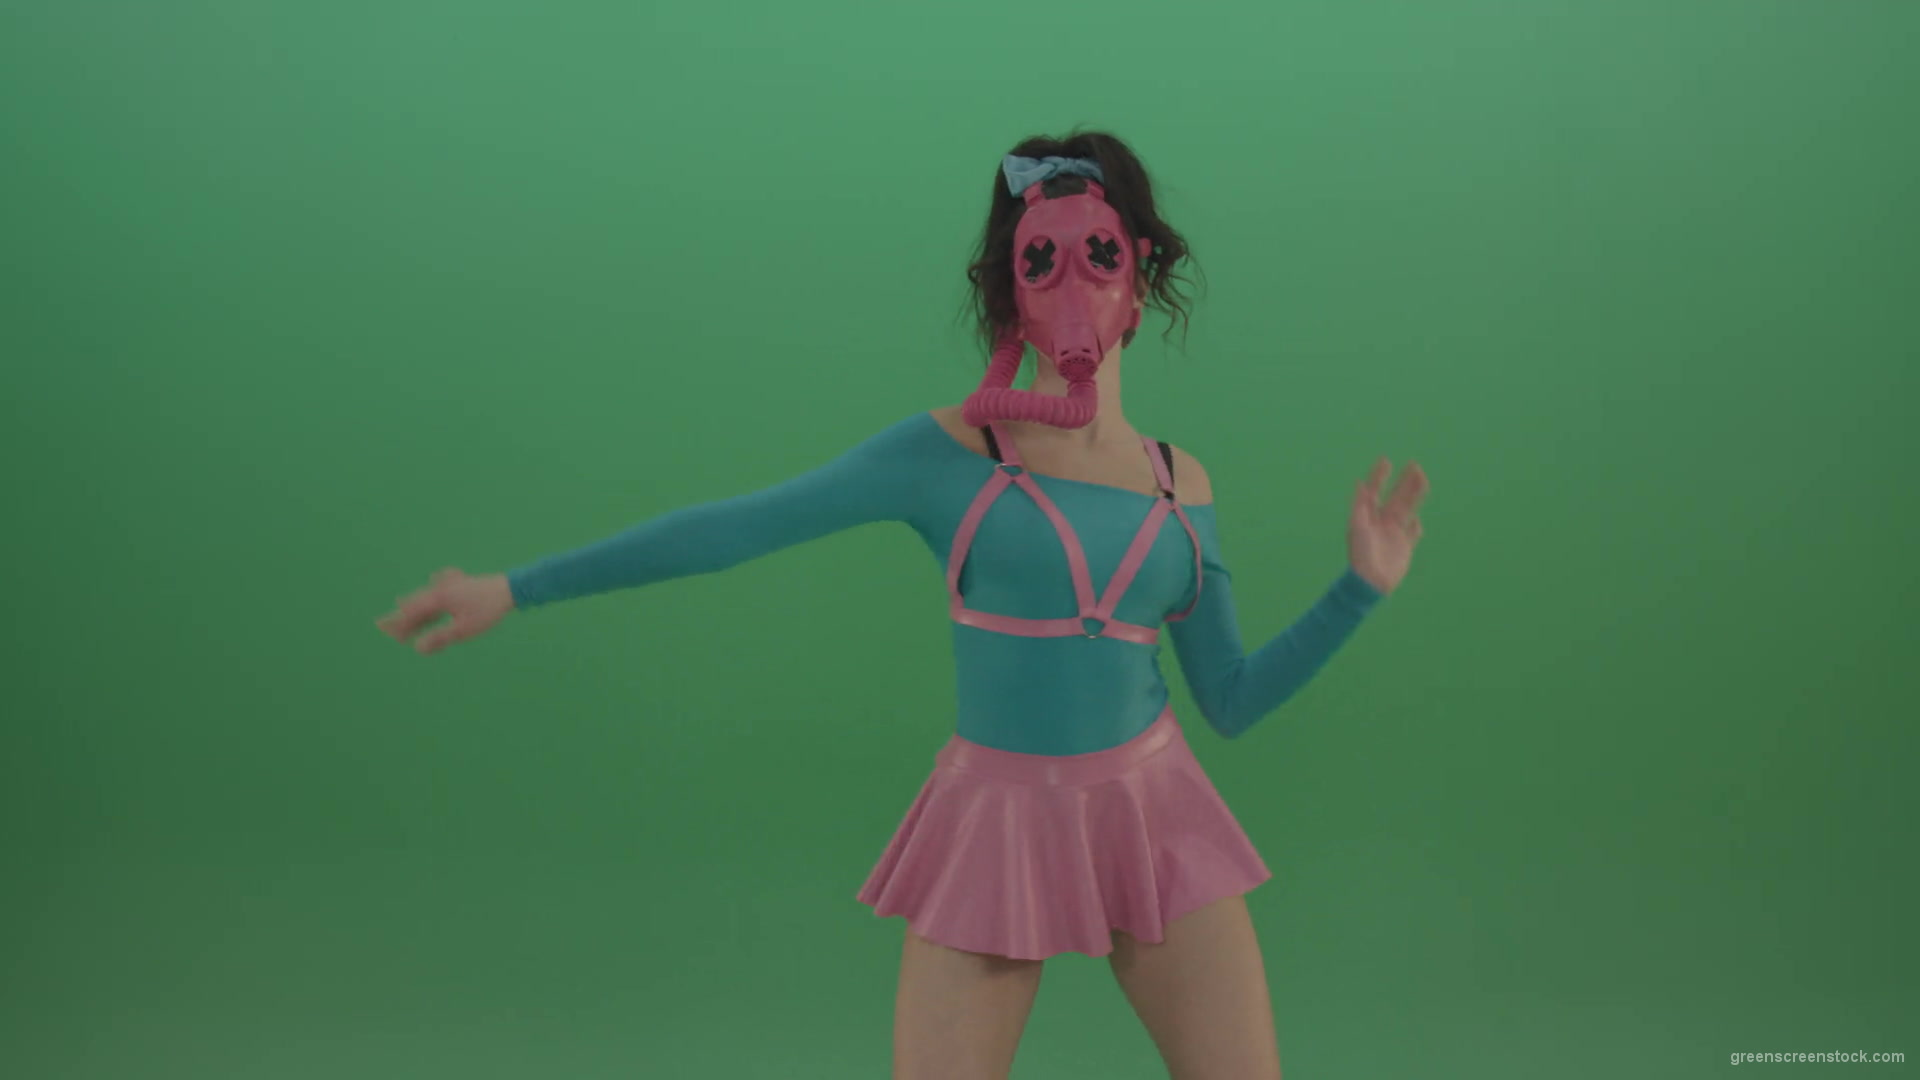 Go-Go-Dancing-Woman-in-Pink-Gas-Mask-sexy-moving-on-green-screen-4K-Video-Footage-1920_006 Green Screen Stock